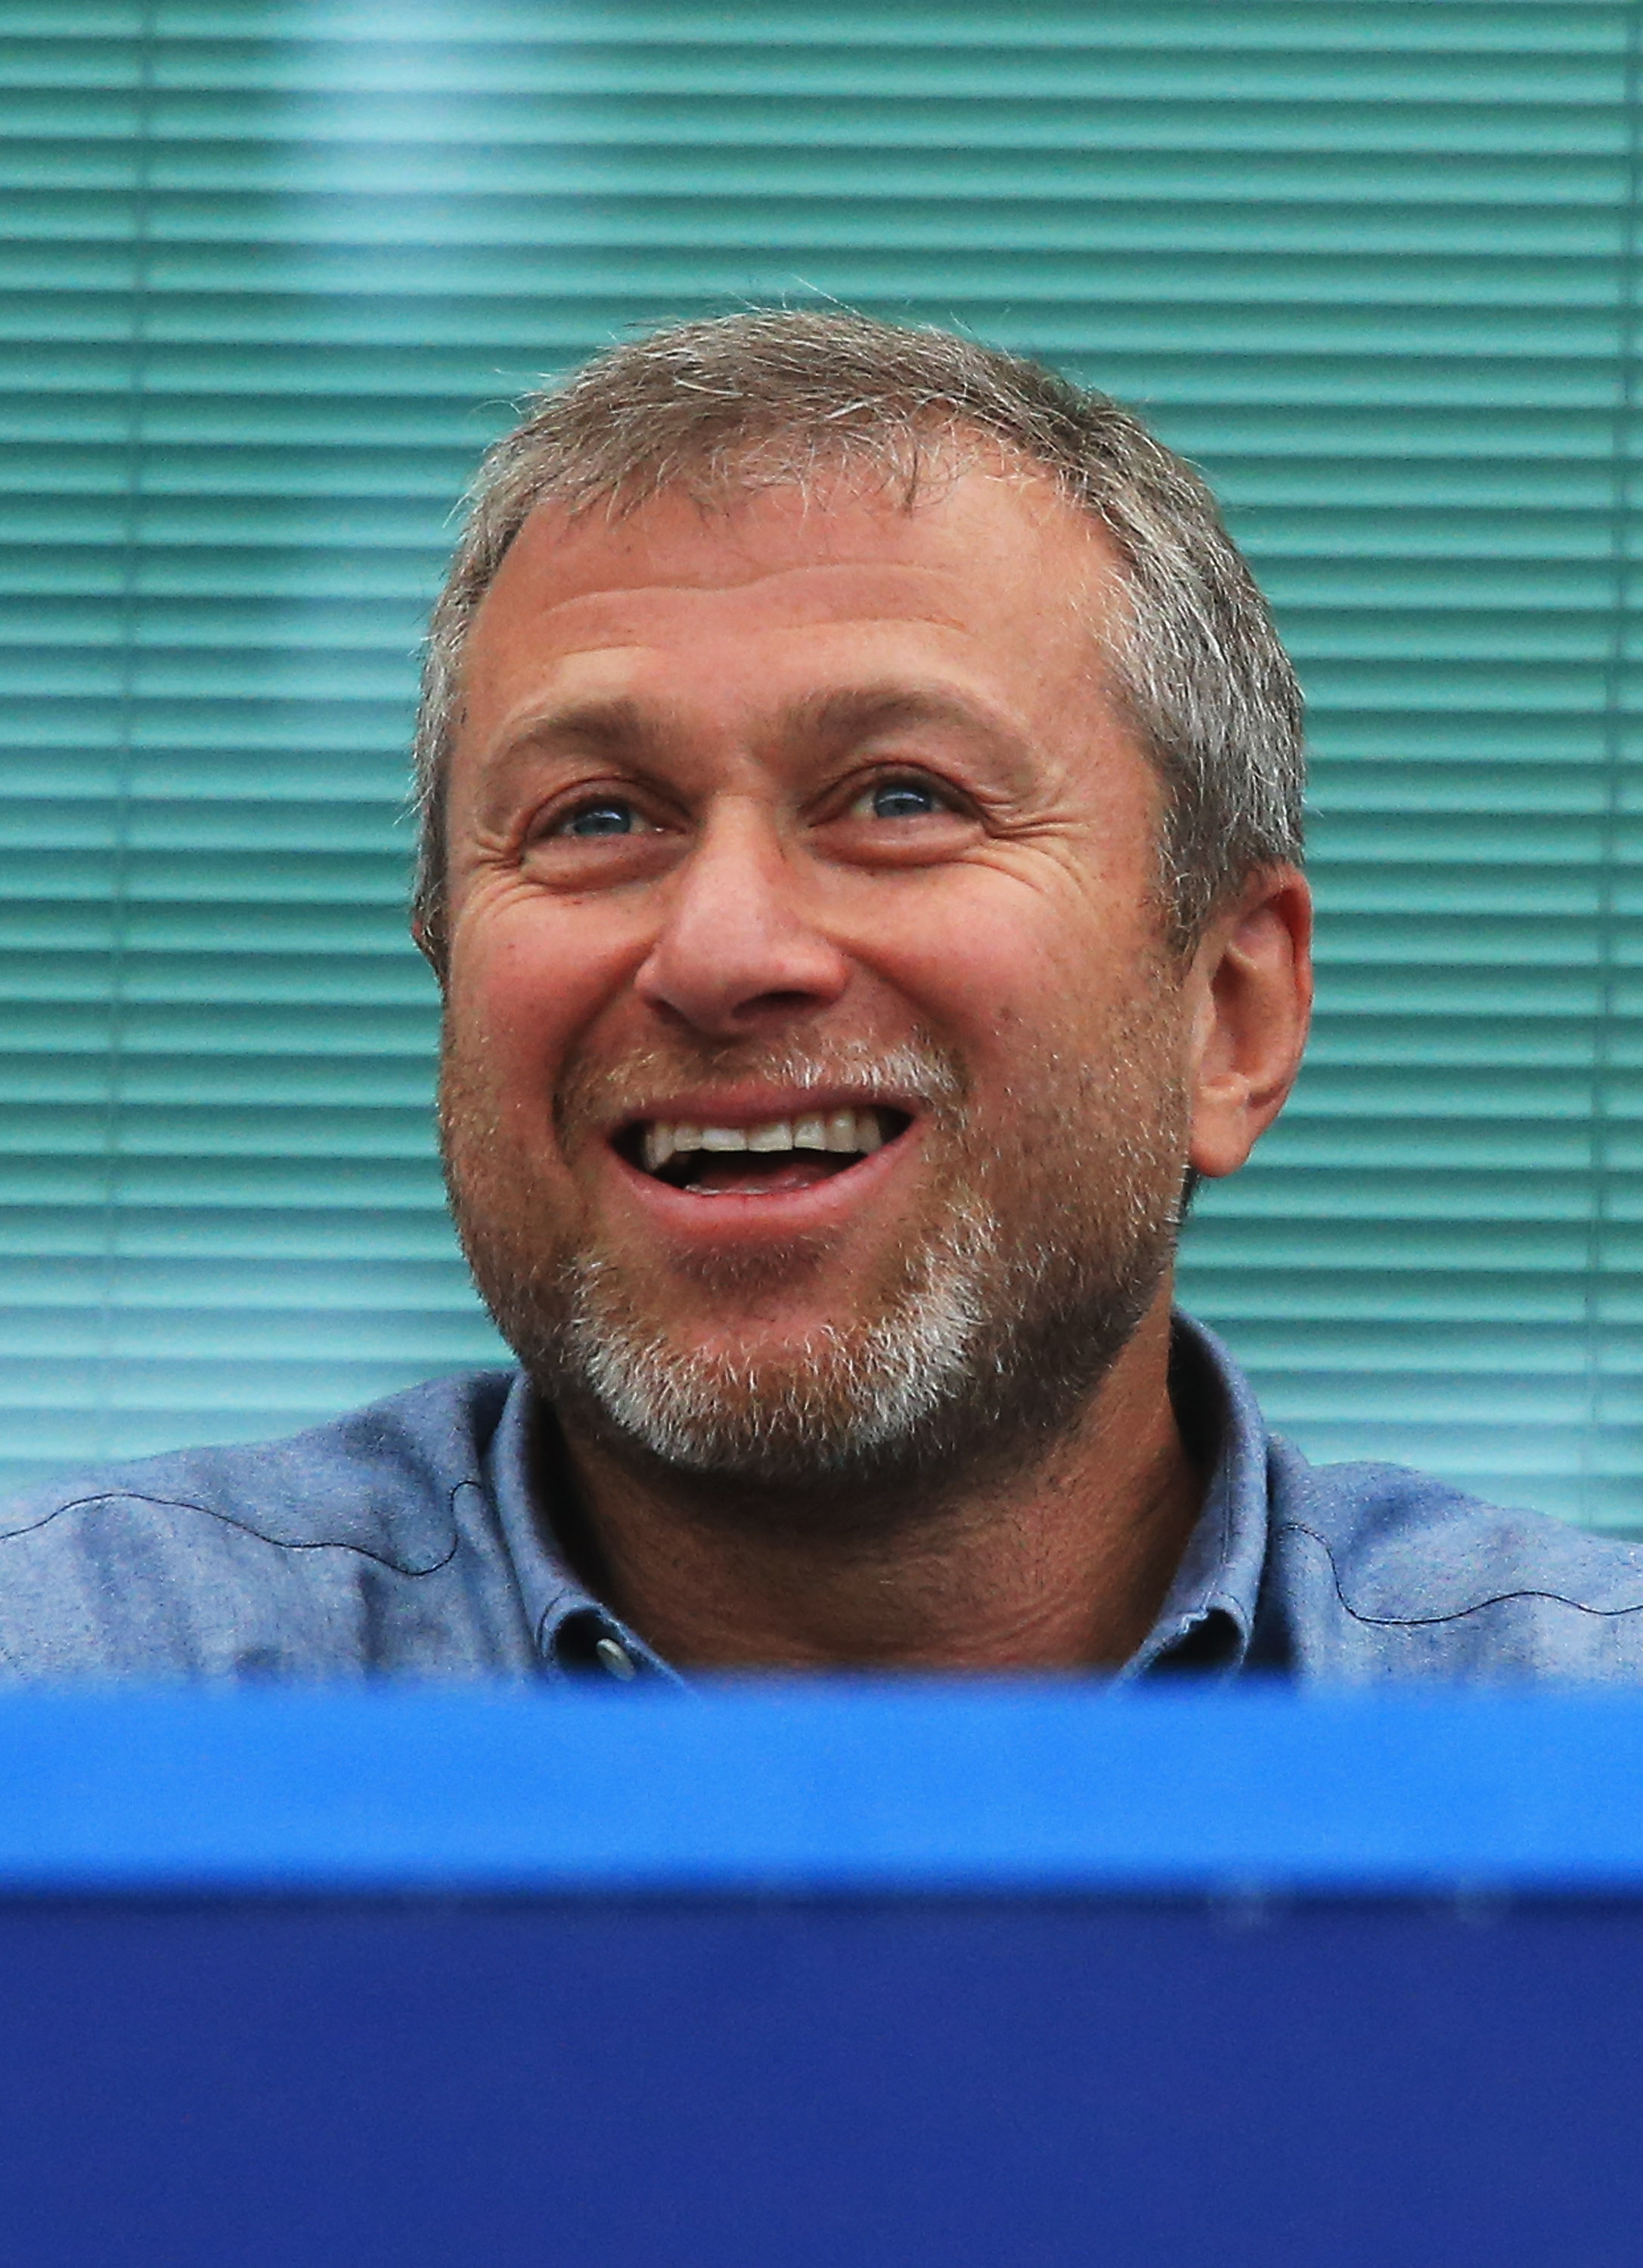 Roman Abramovich at the Barclays Premier League match between Chelsea and Hull City in London on Aug. 18, 2013.